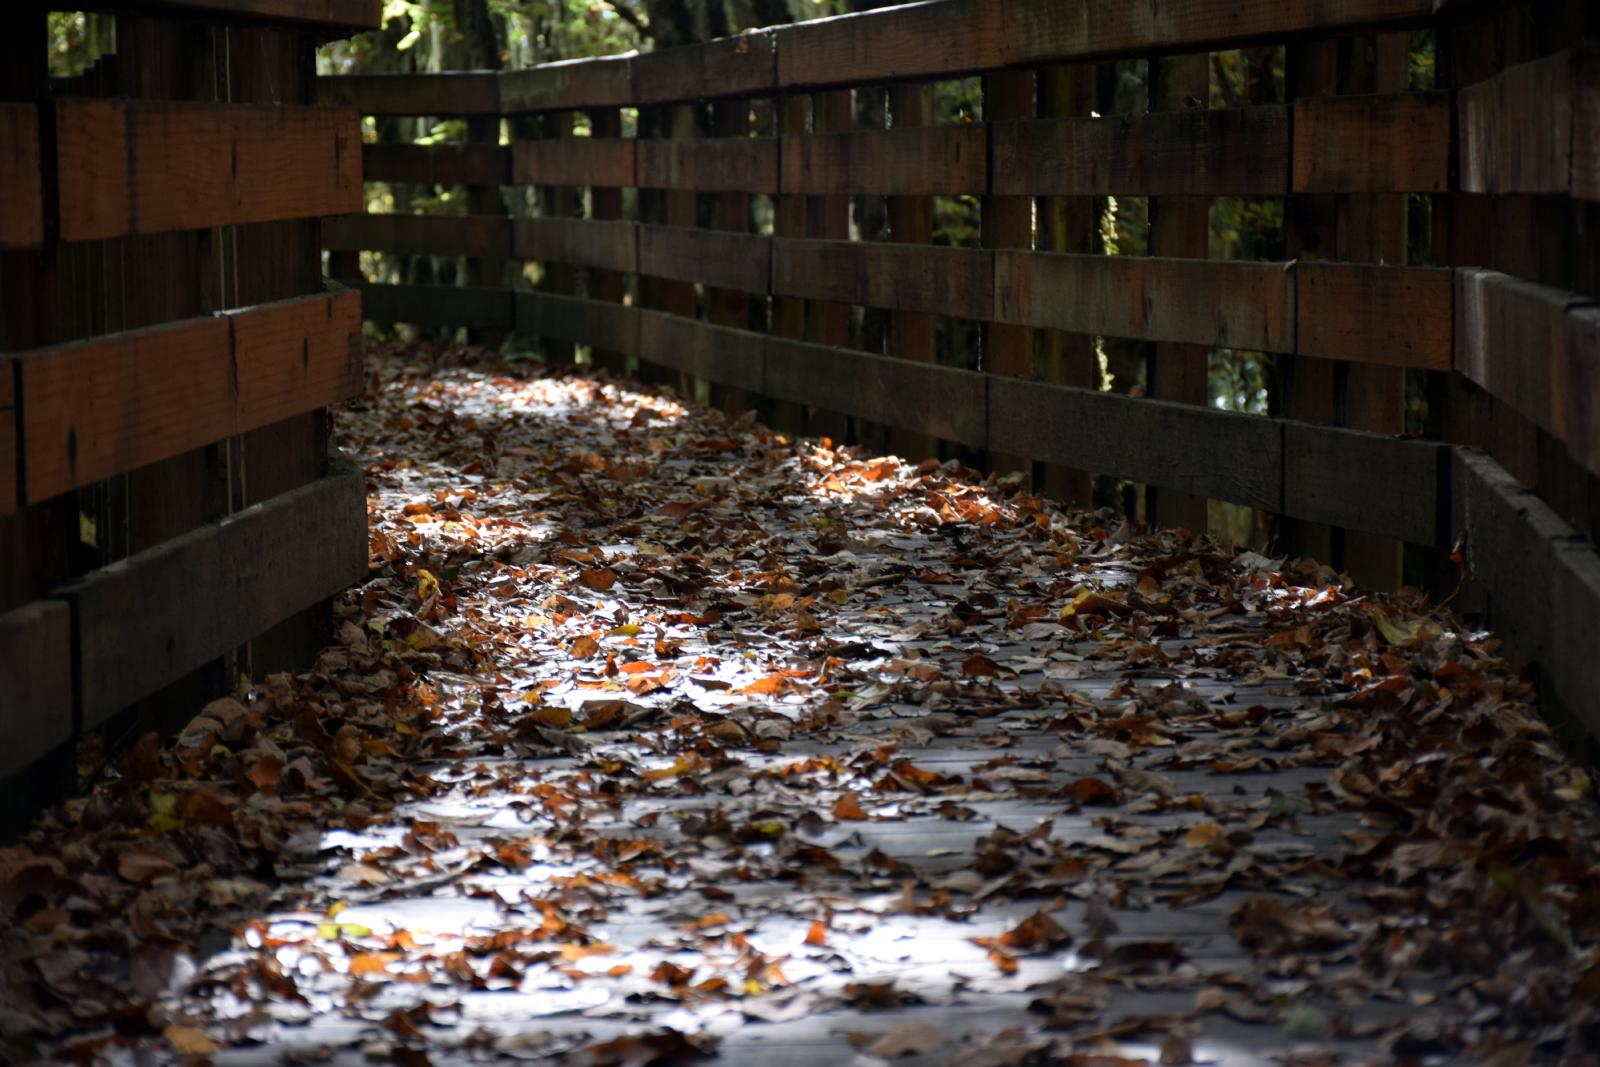 Leaves on a raised wooden trail